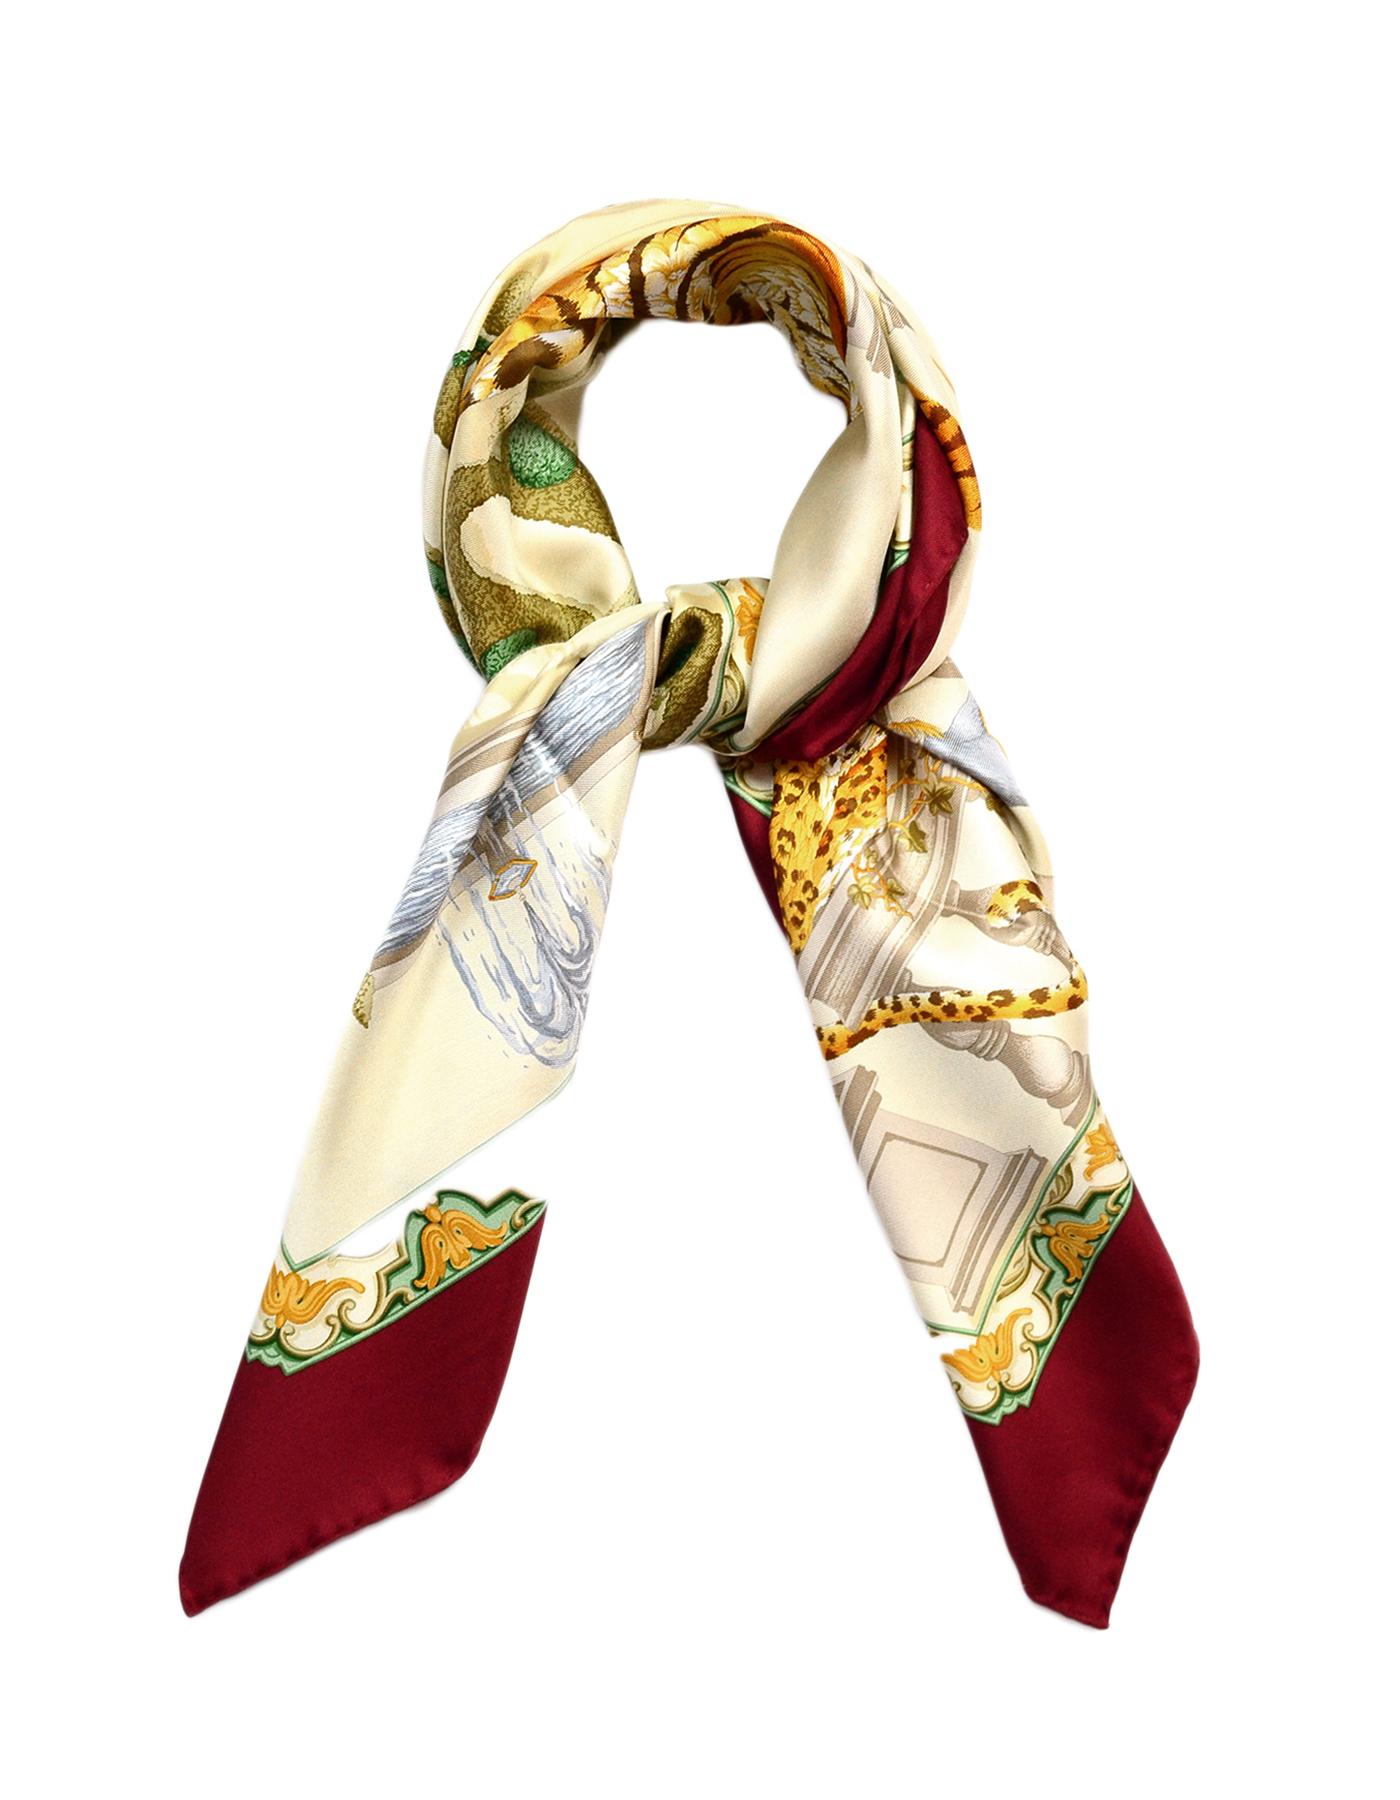 Salvatore Ferragamo Burgundy Red/Cream Leopard Silk Scarf 90cm

Made In: Italy  
Color: Burgundy red, cream
Materials: 100% silk
Overall Condition: Excellent pre-owned condition 
Includes:  Salvatore Ferragamo sleeve box

Measurements: 
35